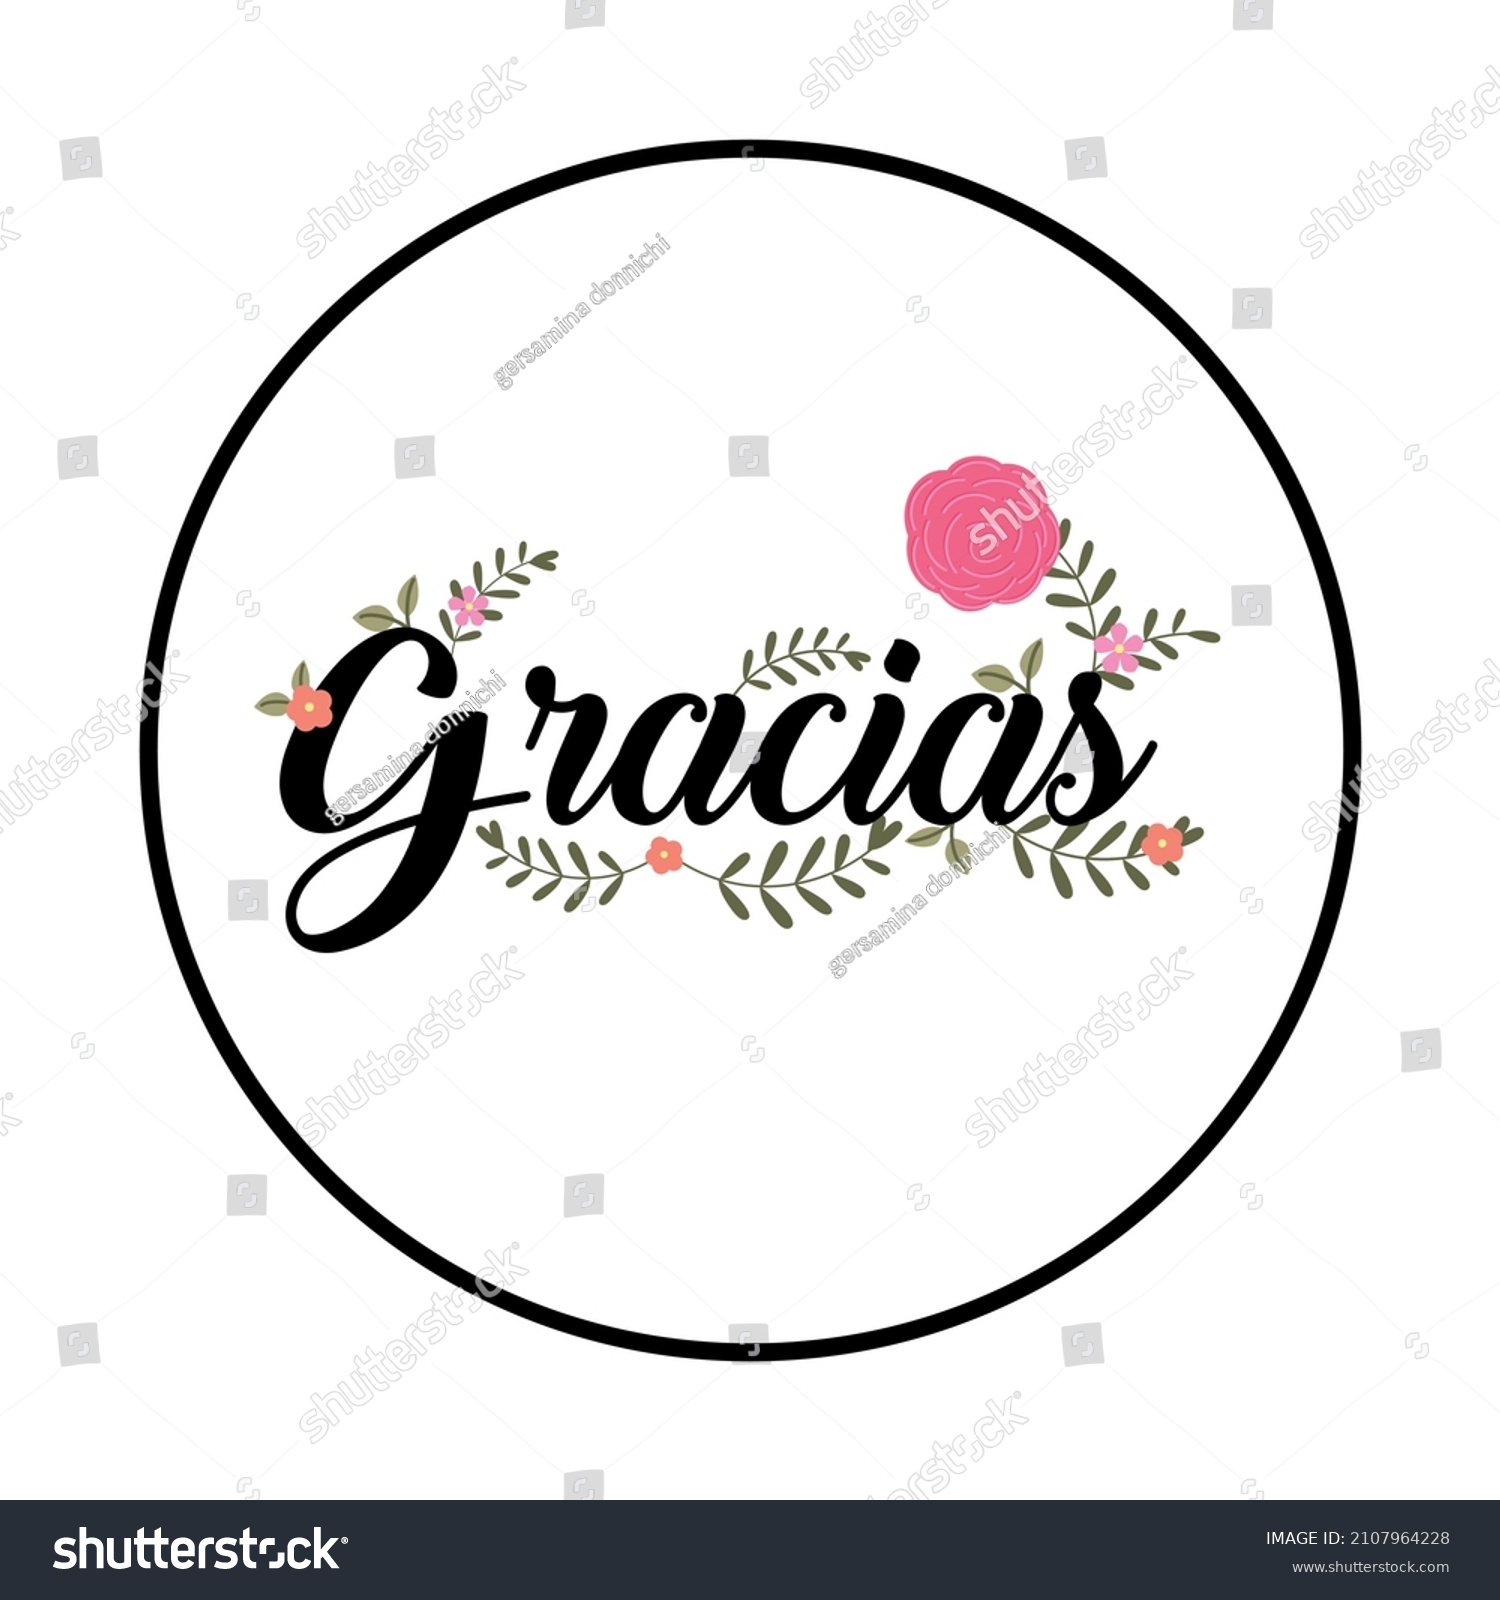 Label Thank You Spanish Means Gracias Stock Vector (Royalty Free